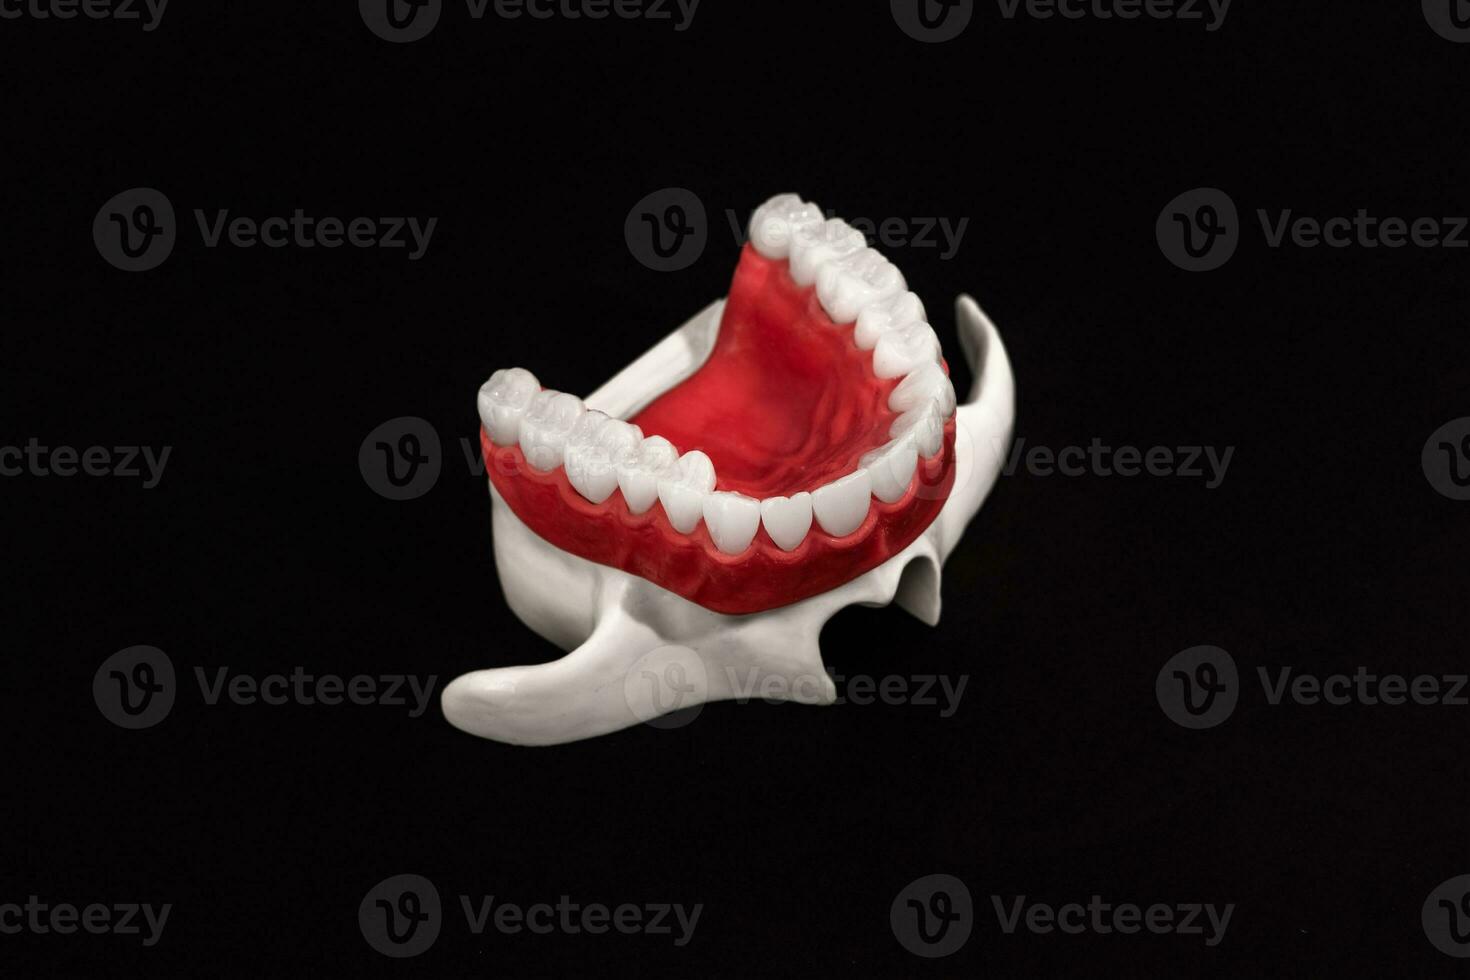 Lower human jaw with teeth anatomy model isolated on black background. Healthy teeth, dental care and orthodontic medical concept. photo